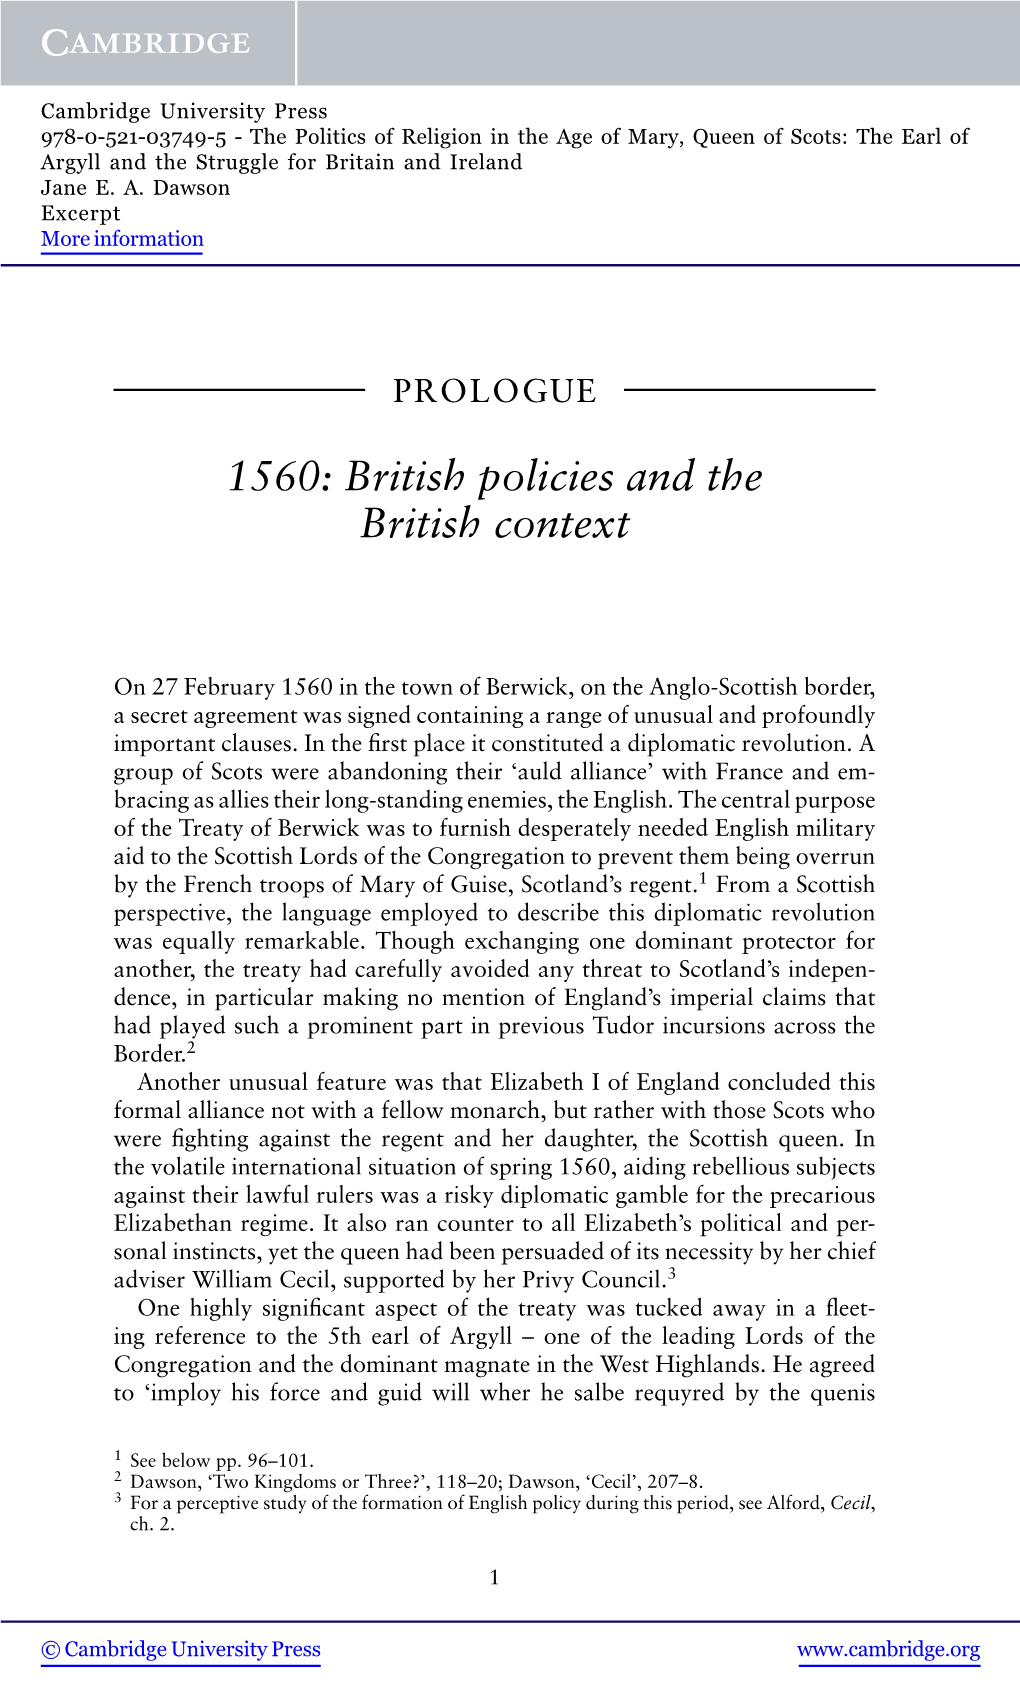 The Politics of Religion in the Age of Mary, Queen of Scots: the Earl of Argyll and the Struggle for Britain and Ireland Jane E